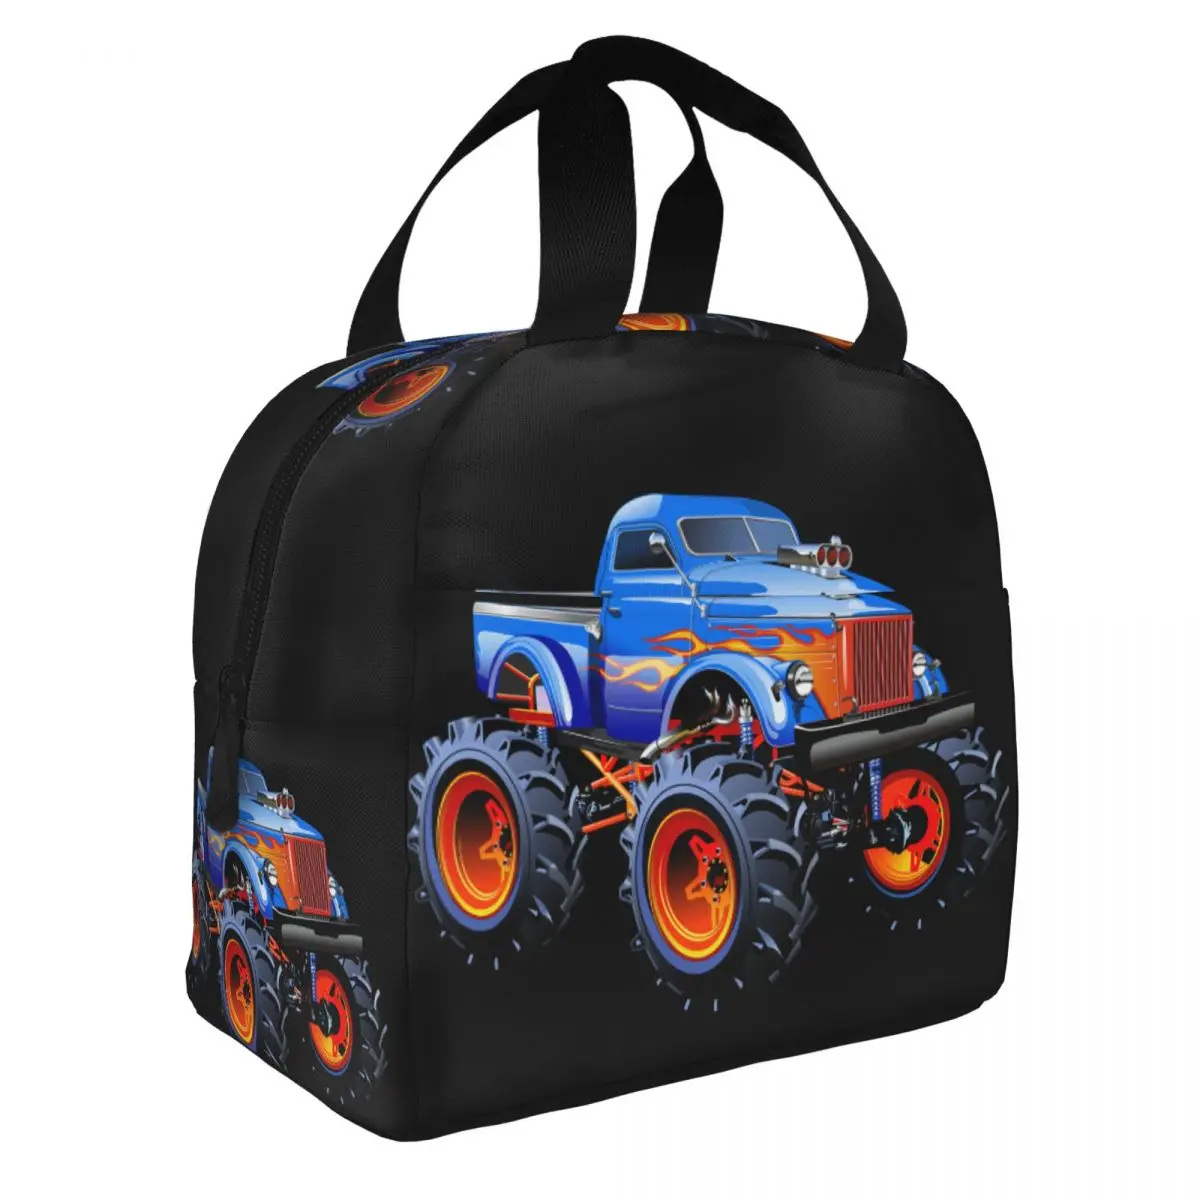 Tractor Lunch Bento Bags Portable Aluminum Foil thickened Thermal Cloth Lunch Bag for Women Men Boy